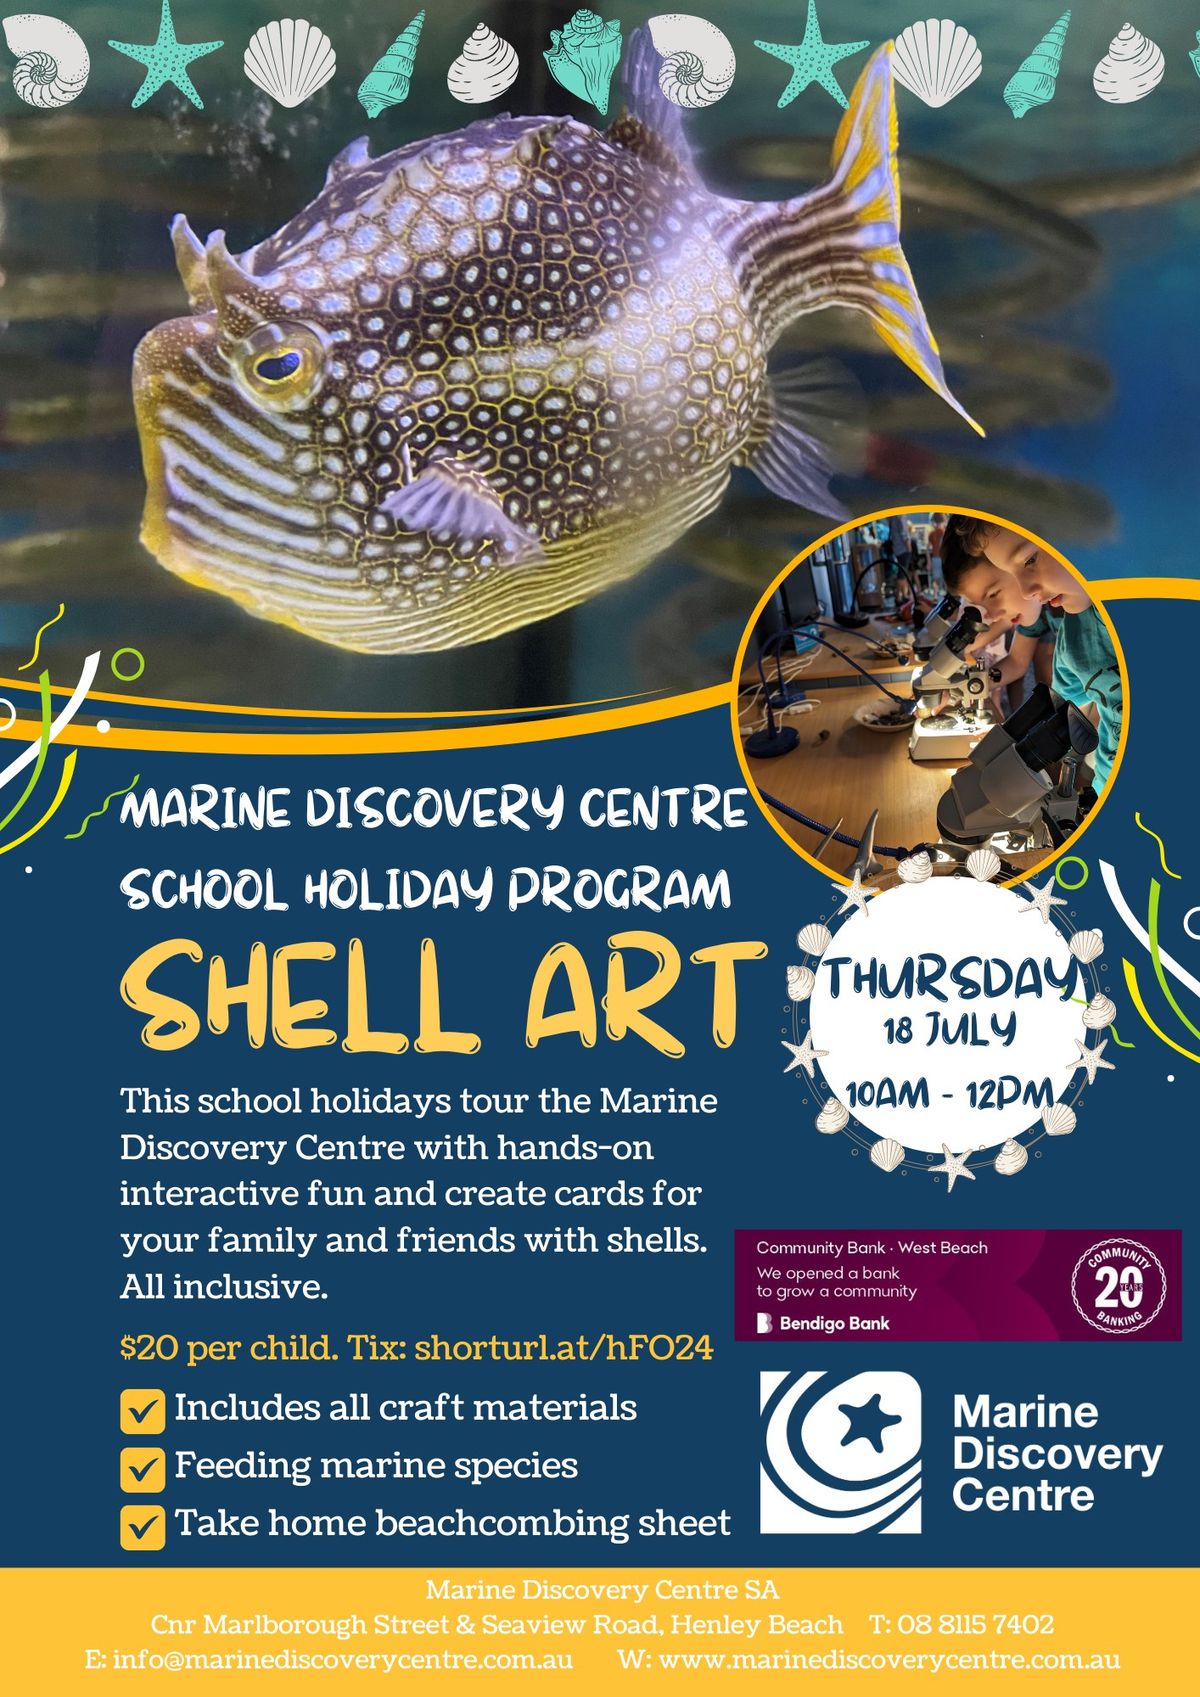 July School Holiday Program with Shell Art